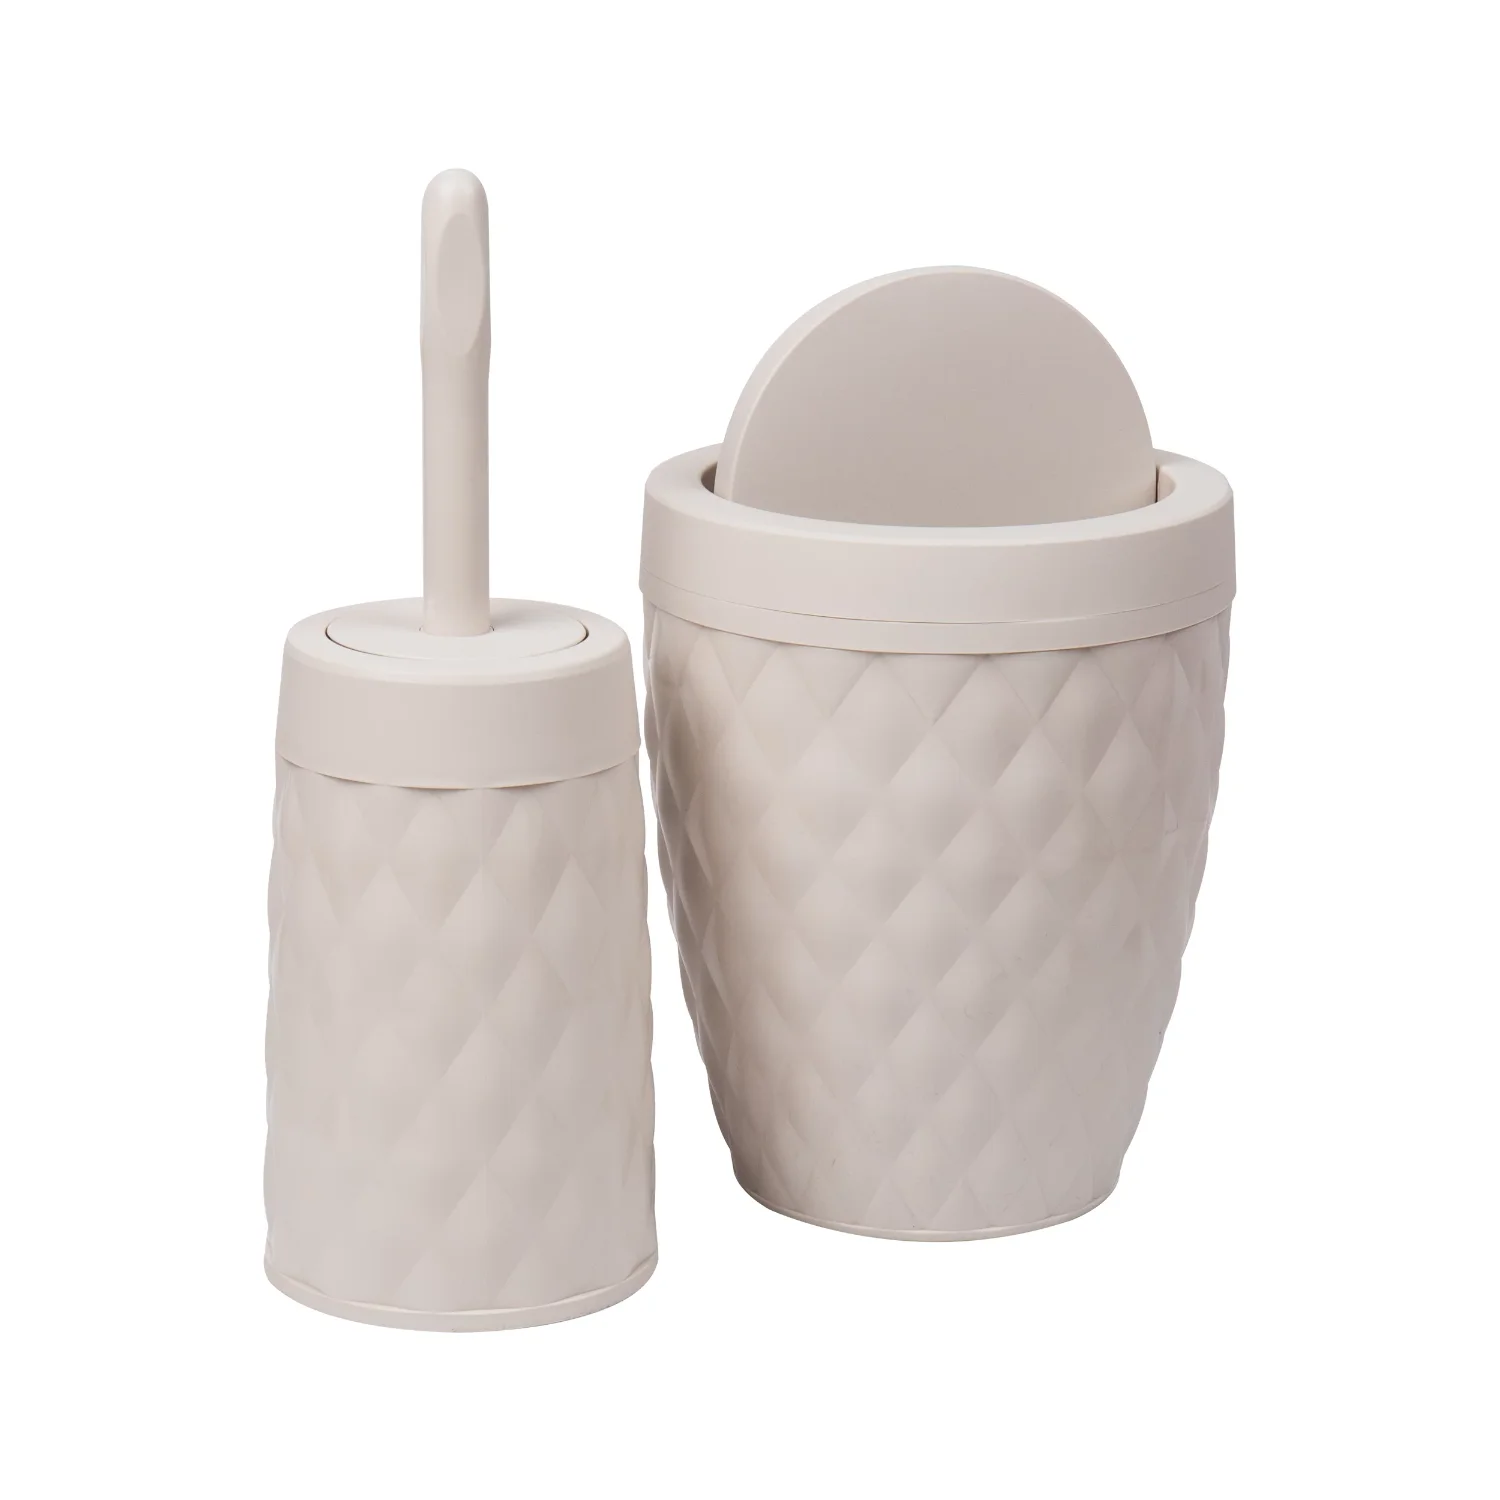 basket-collection-round-wastepaper-basket-with-swivel-lid-and-toilet-brush-set-bathroom-2-piece-set-ivory